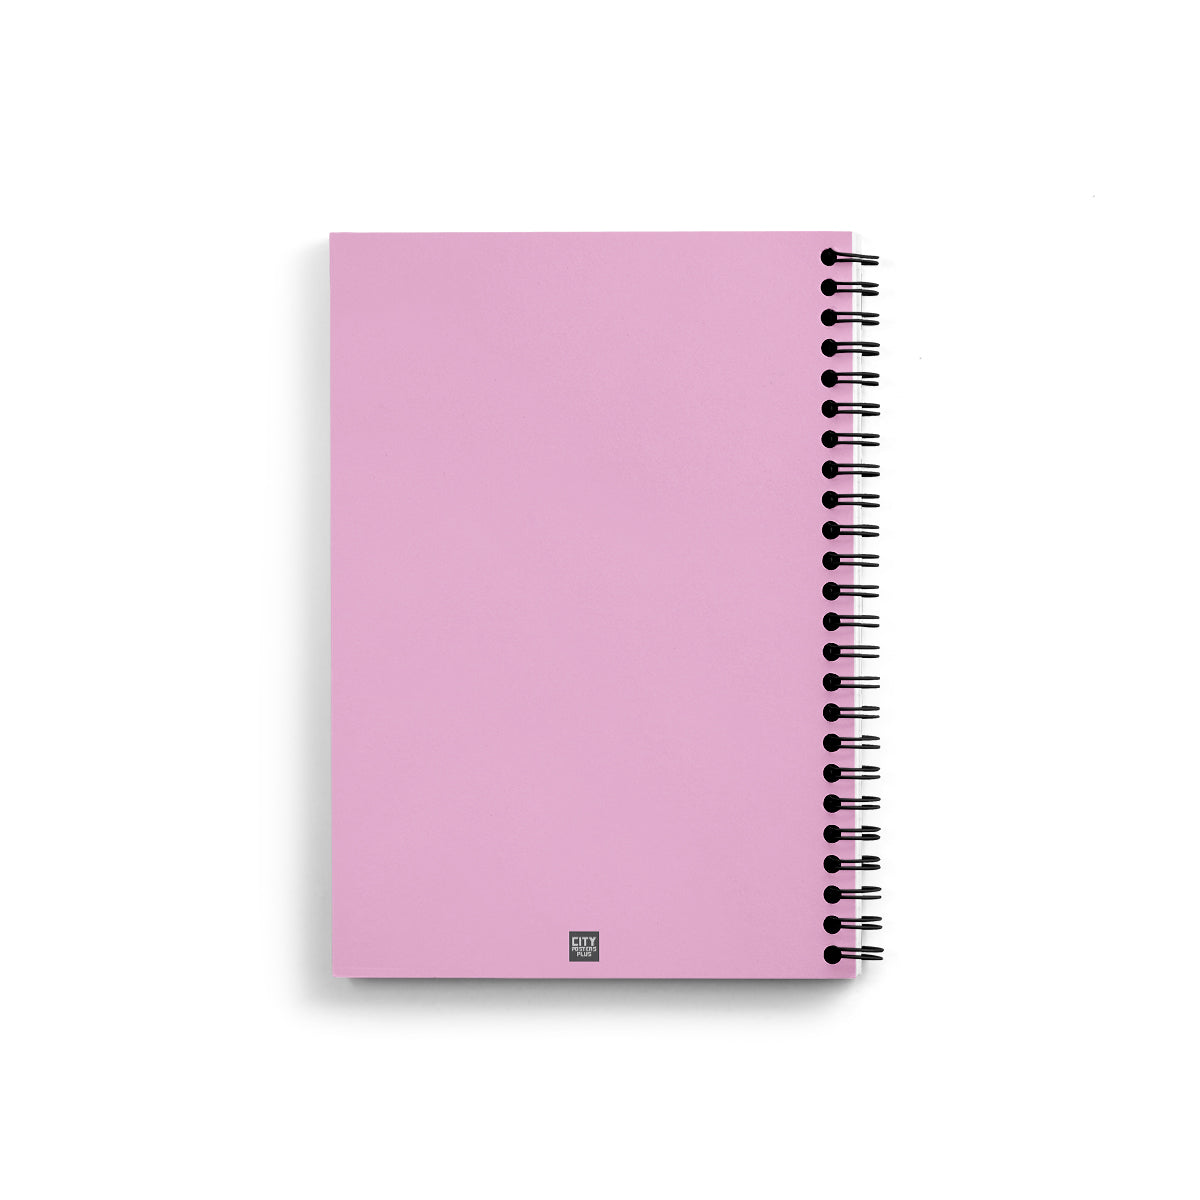 50 Number Notebook (Light Pink, A5 Size, 100 Pages, Ruled, 4 Pack)